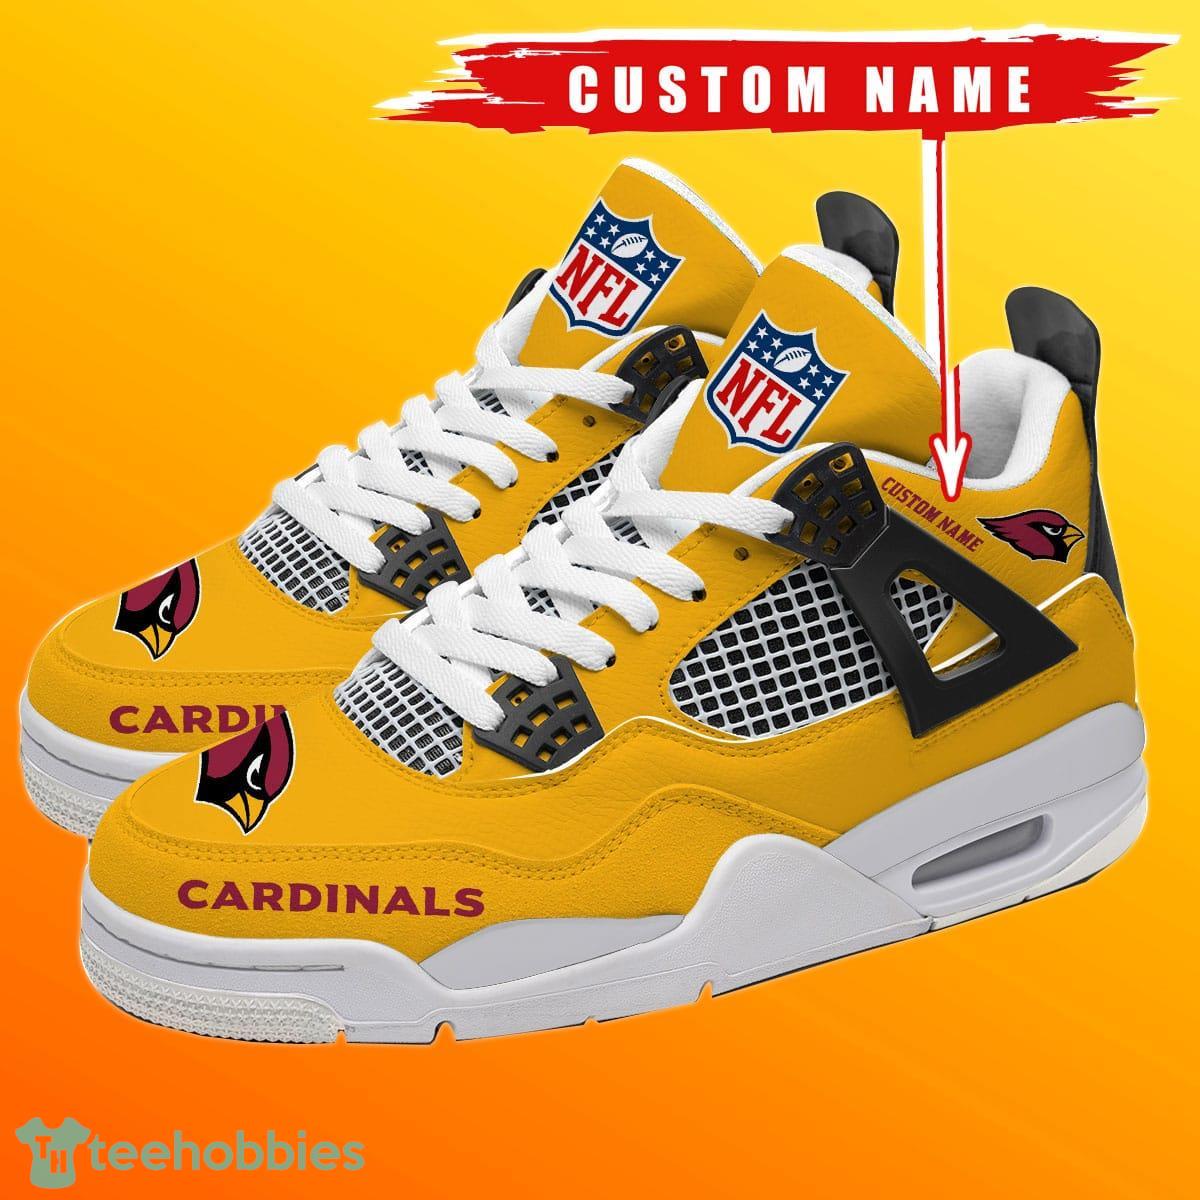 Arizona Cardinals Personalized Name NFL Air Jordan 4 Trending Sneaker Unique Gift For Fans Product Photo 1